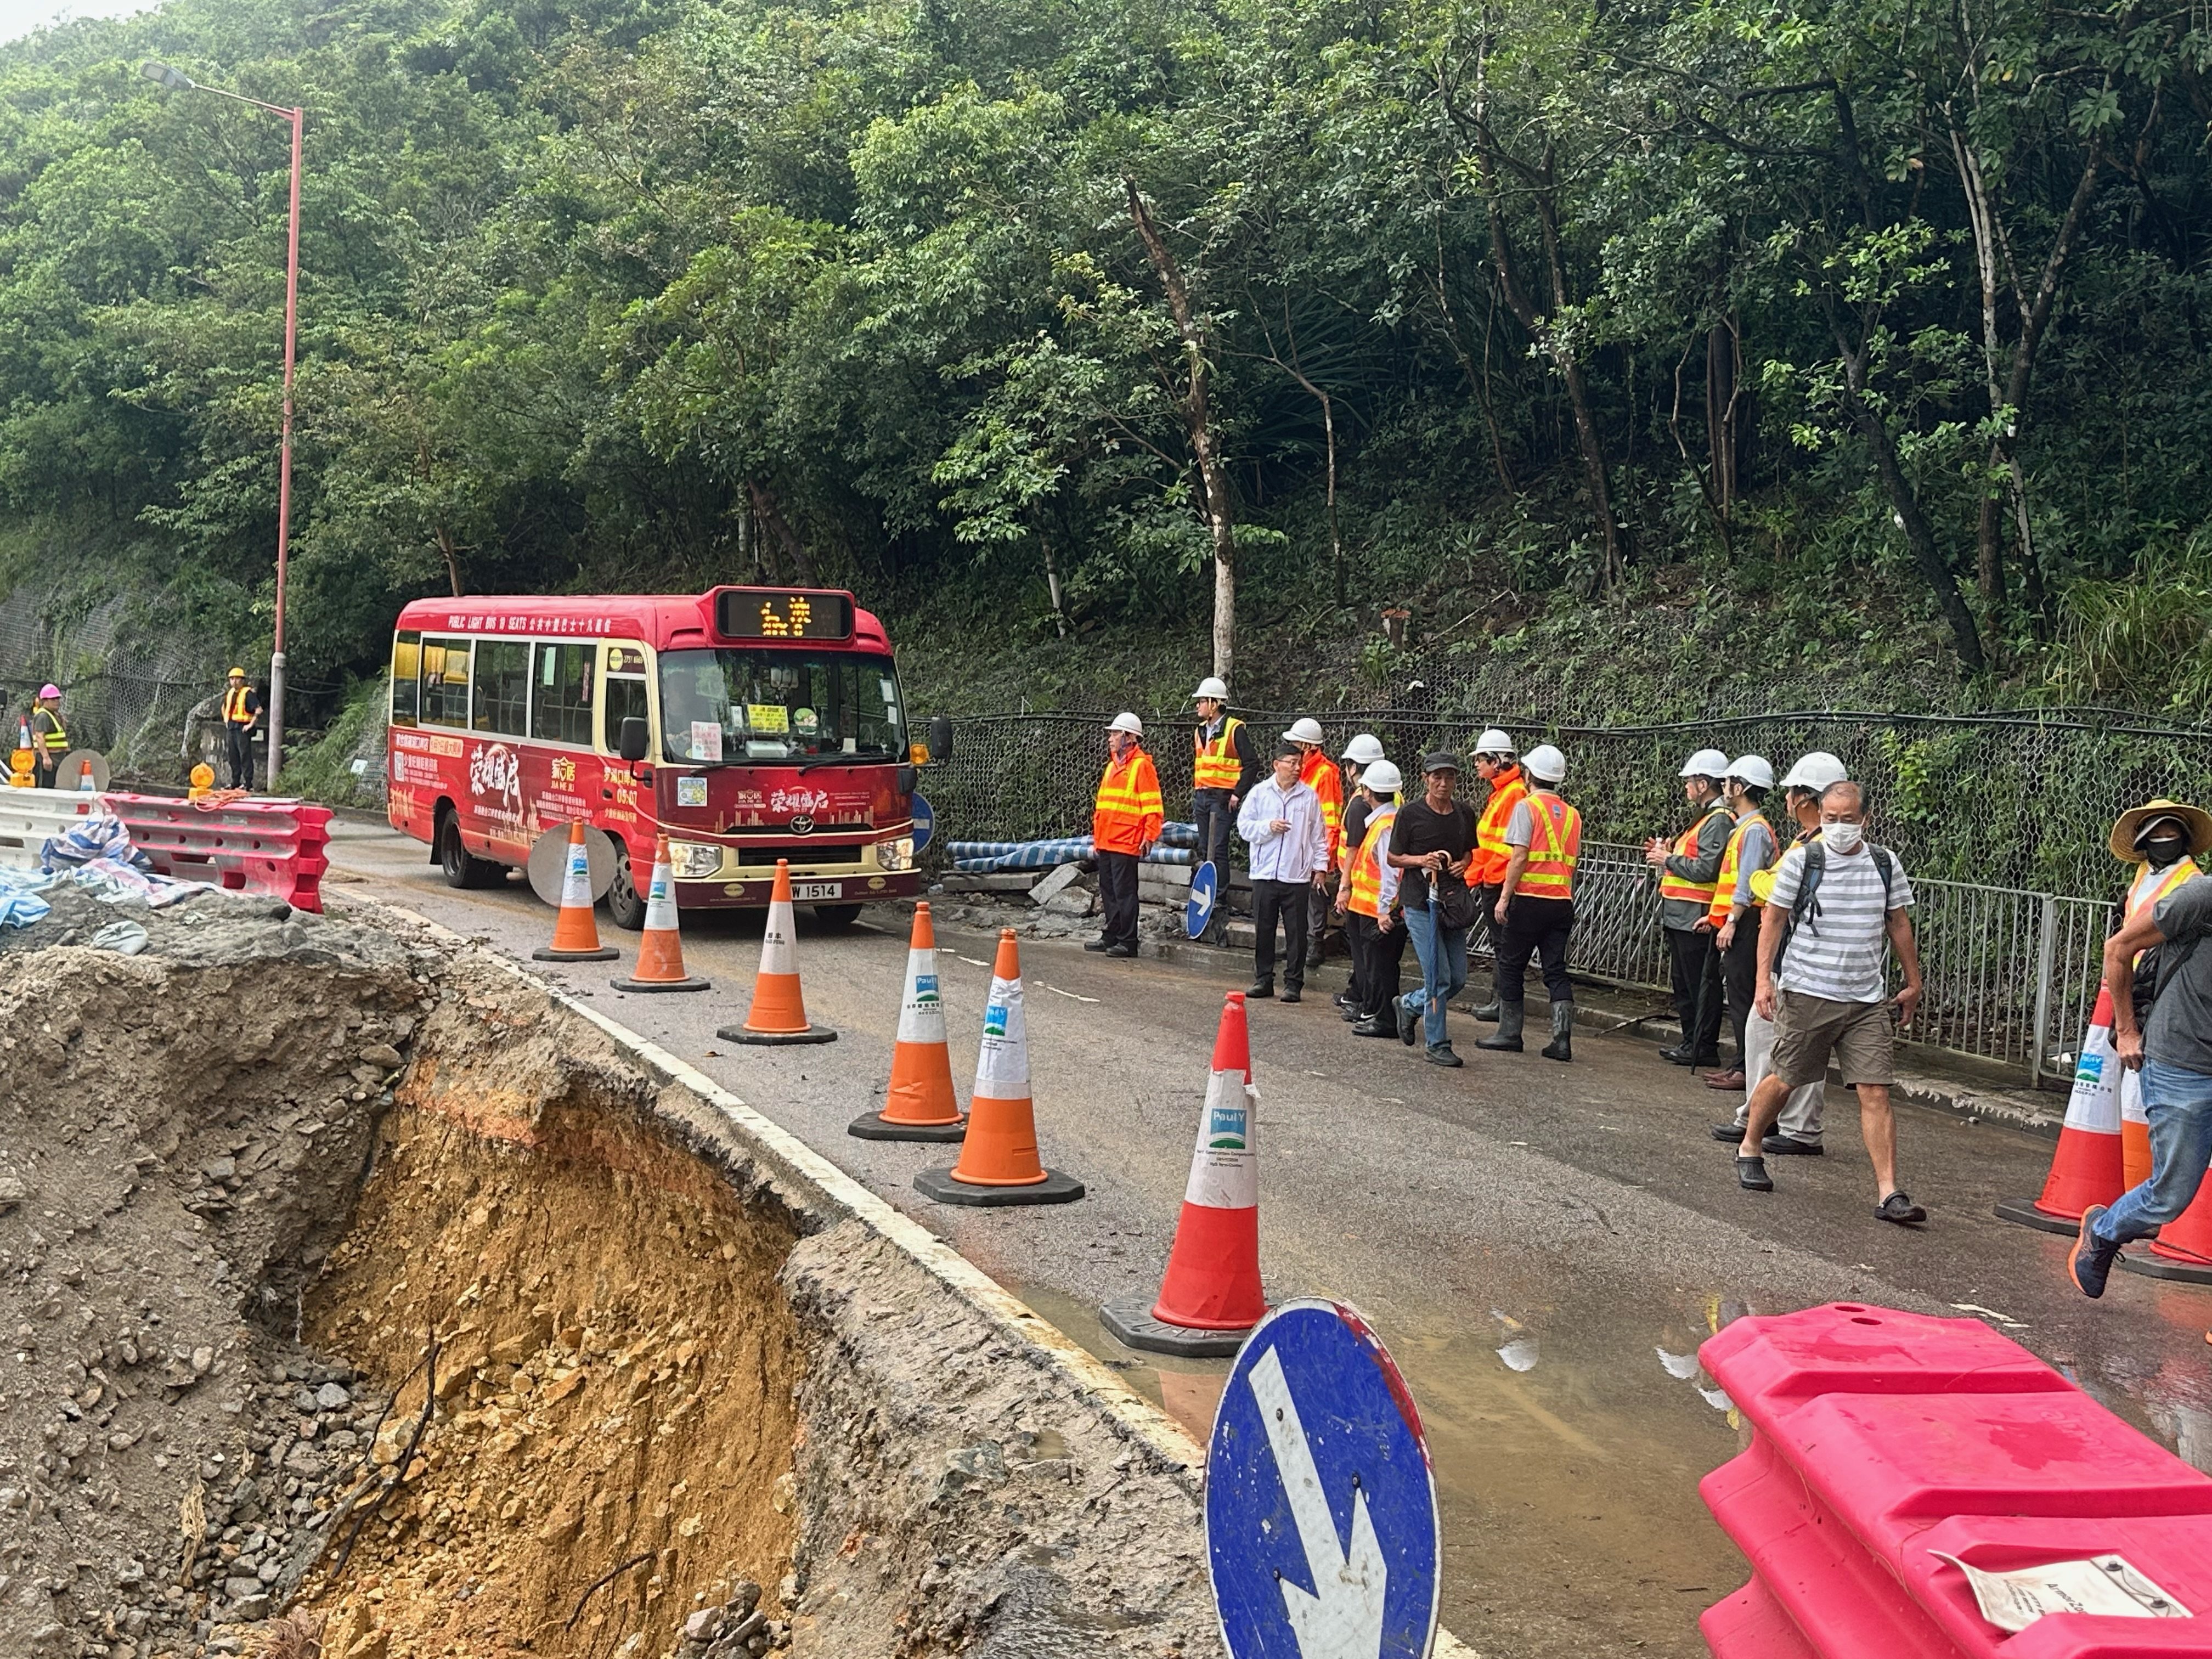 Shek O’s only access road to Hong Kong was partially reopened for government vehicles and a red minibus route running between the rural area and Shau Kei Wan MTR station. Photo: Handout
